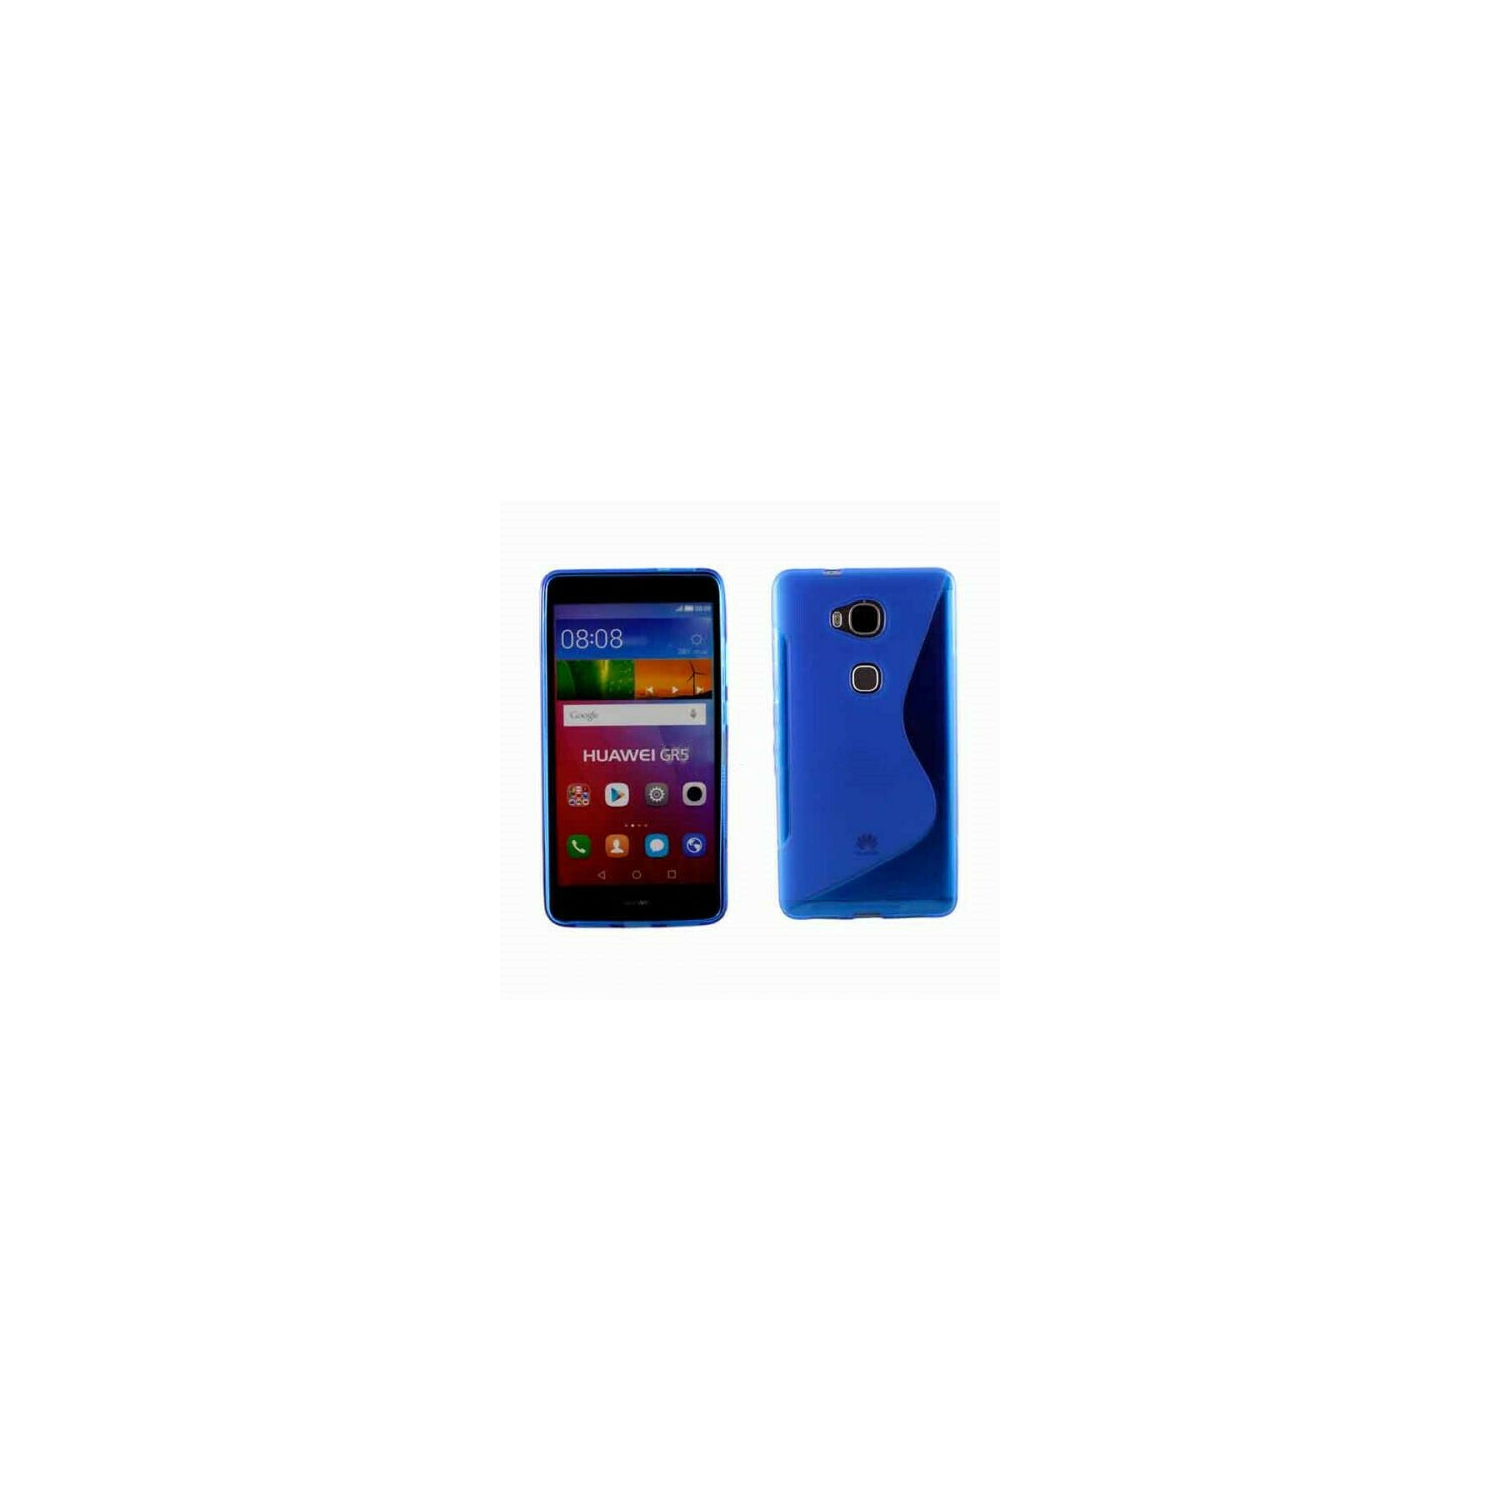 【CSmart】 Ultra Thin Soft TPU Silicone Jelly Bumper Back Cover Case for Huawei GR5 / Honor 5x, Blue